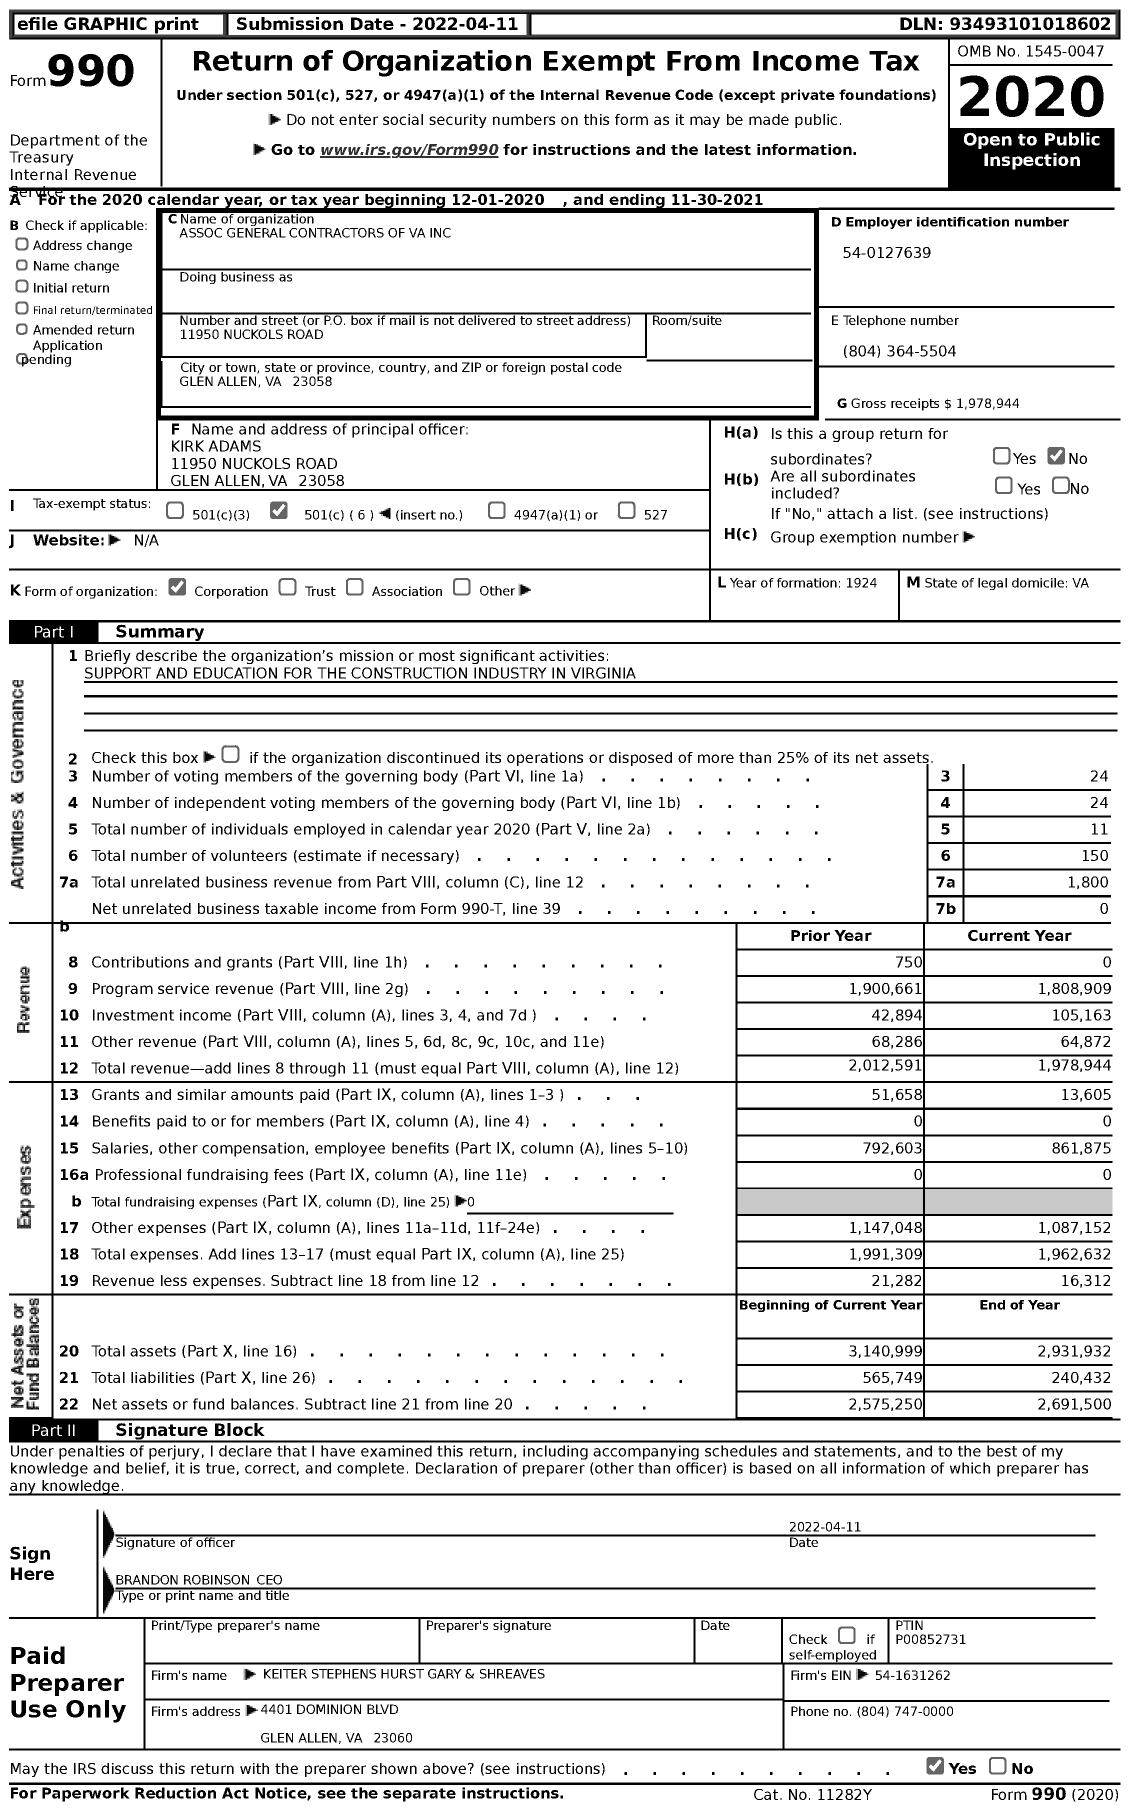 Image of first page of 2020 Form 990 for Association General Contractors of Va (AGC)